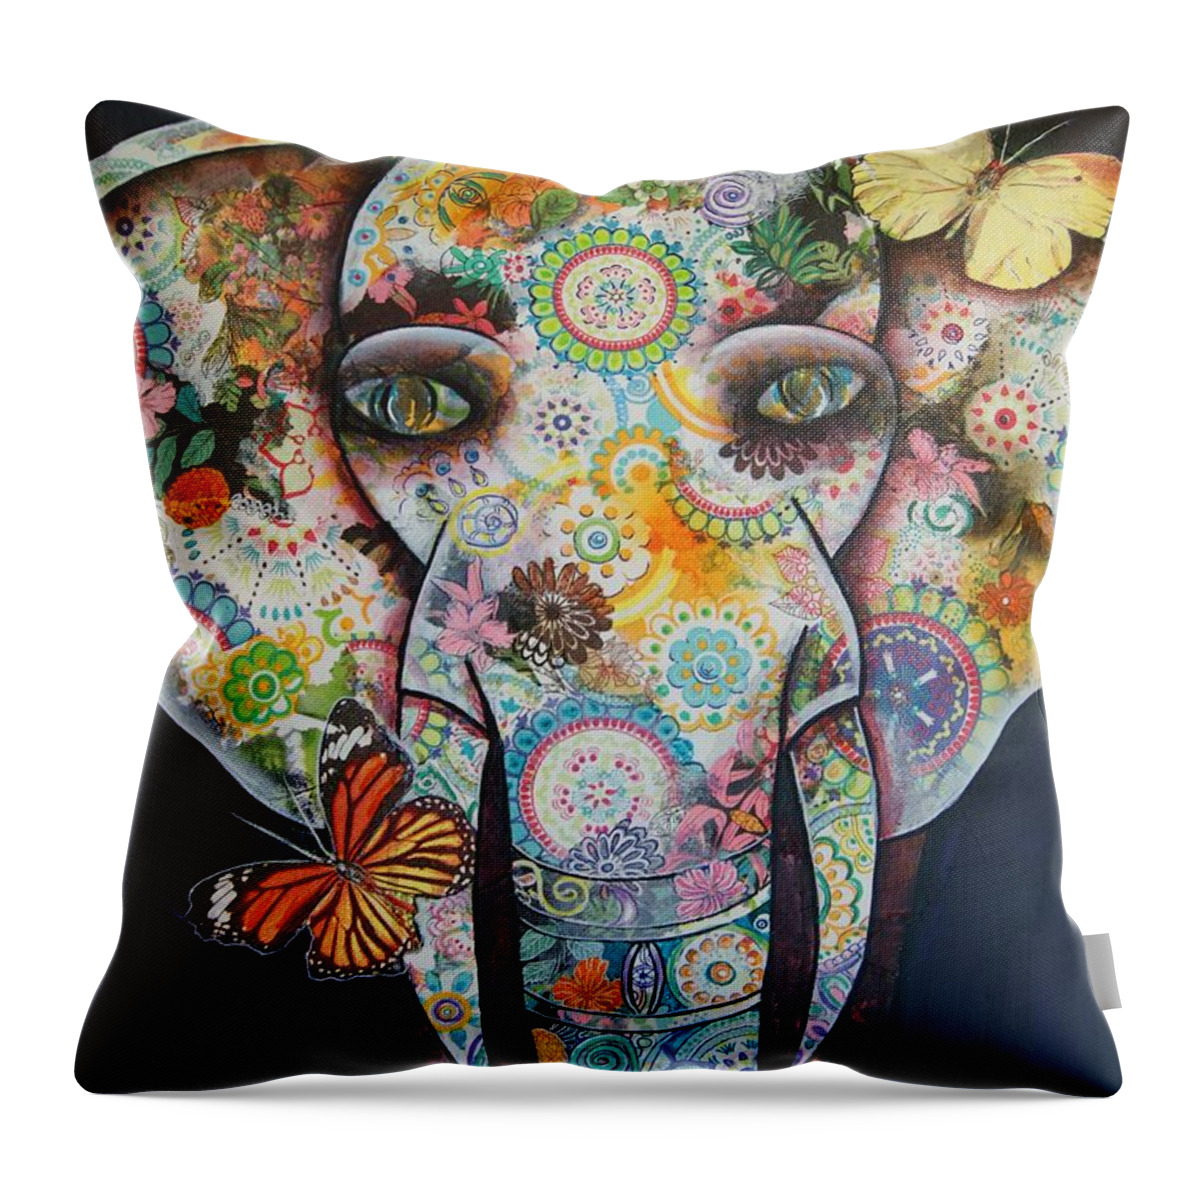 Elephant Throw Pillow featuring the painting Elephant Mixed Media 1 by Reina Cottier